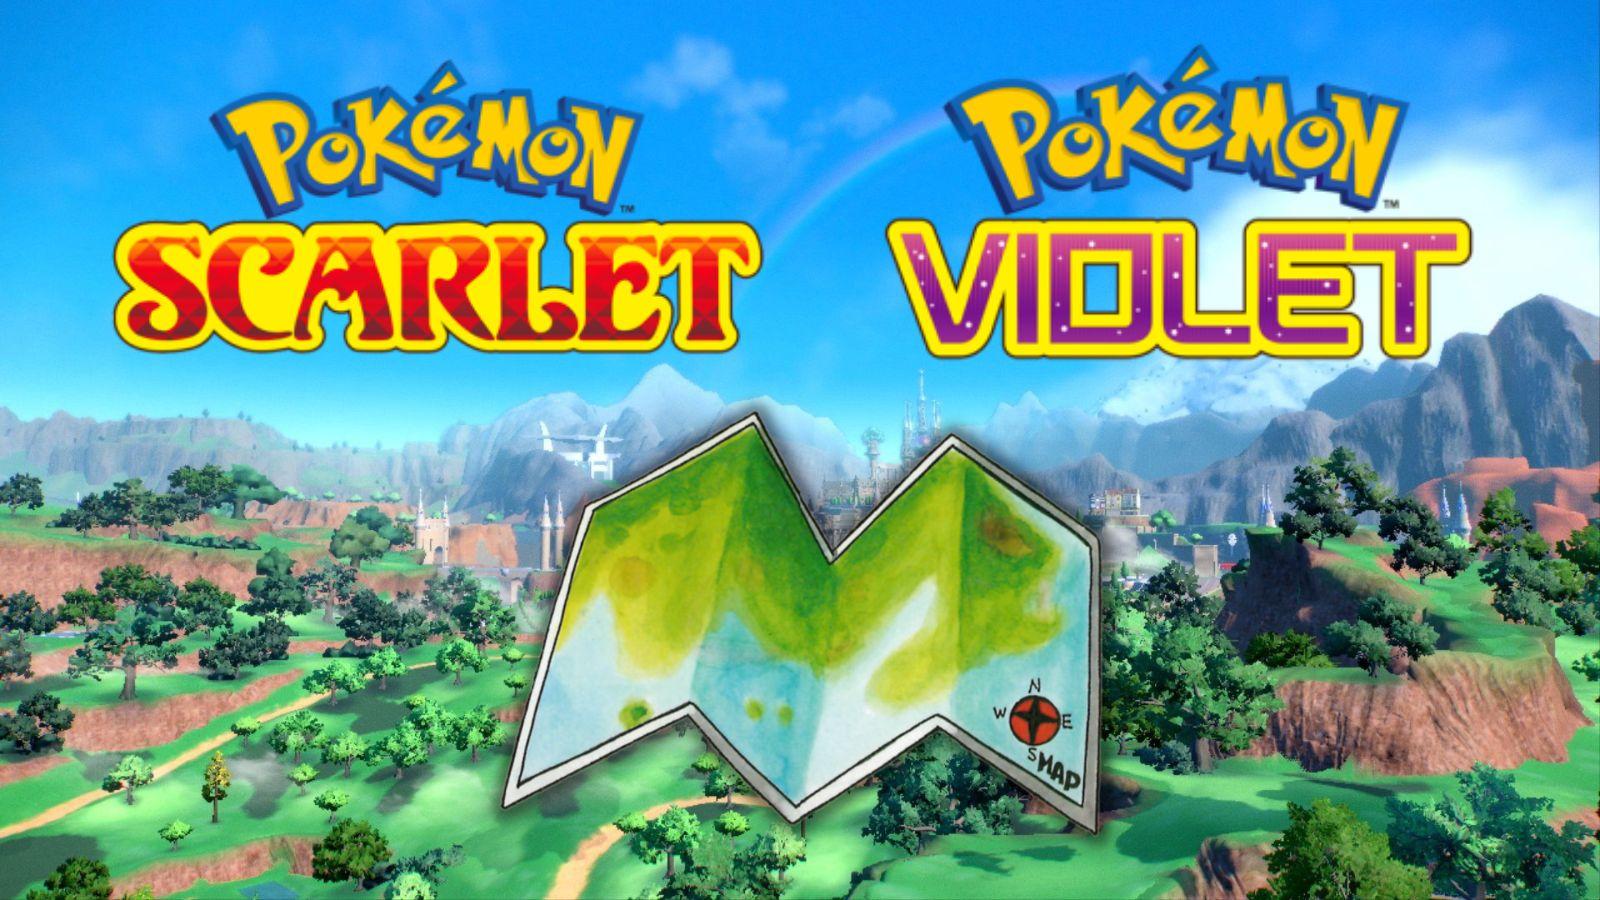 Pokemon Scarlet and Violet DLC Leak Reveals All the Pokemon in the Teal  Mask Pokedex